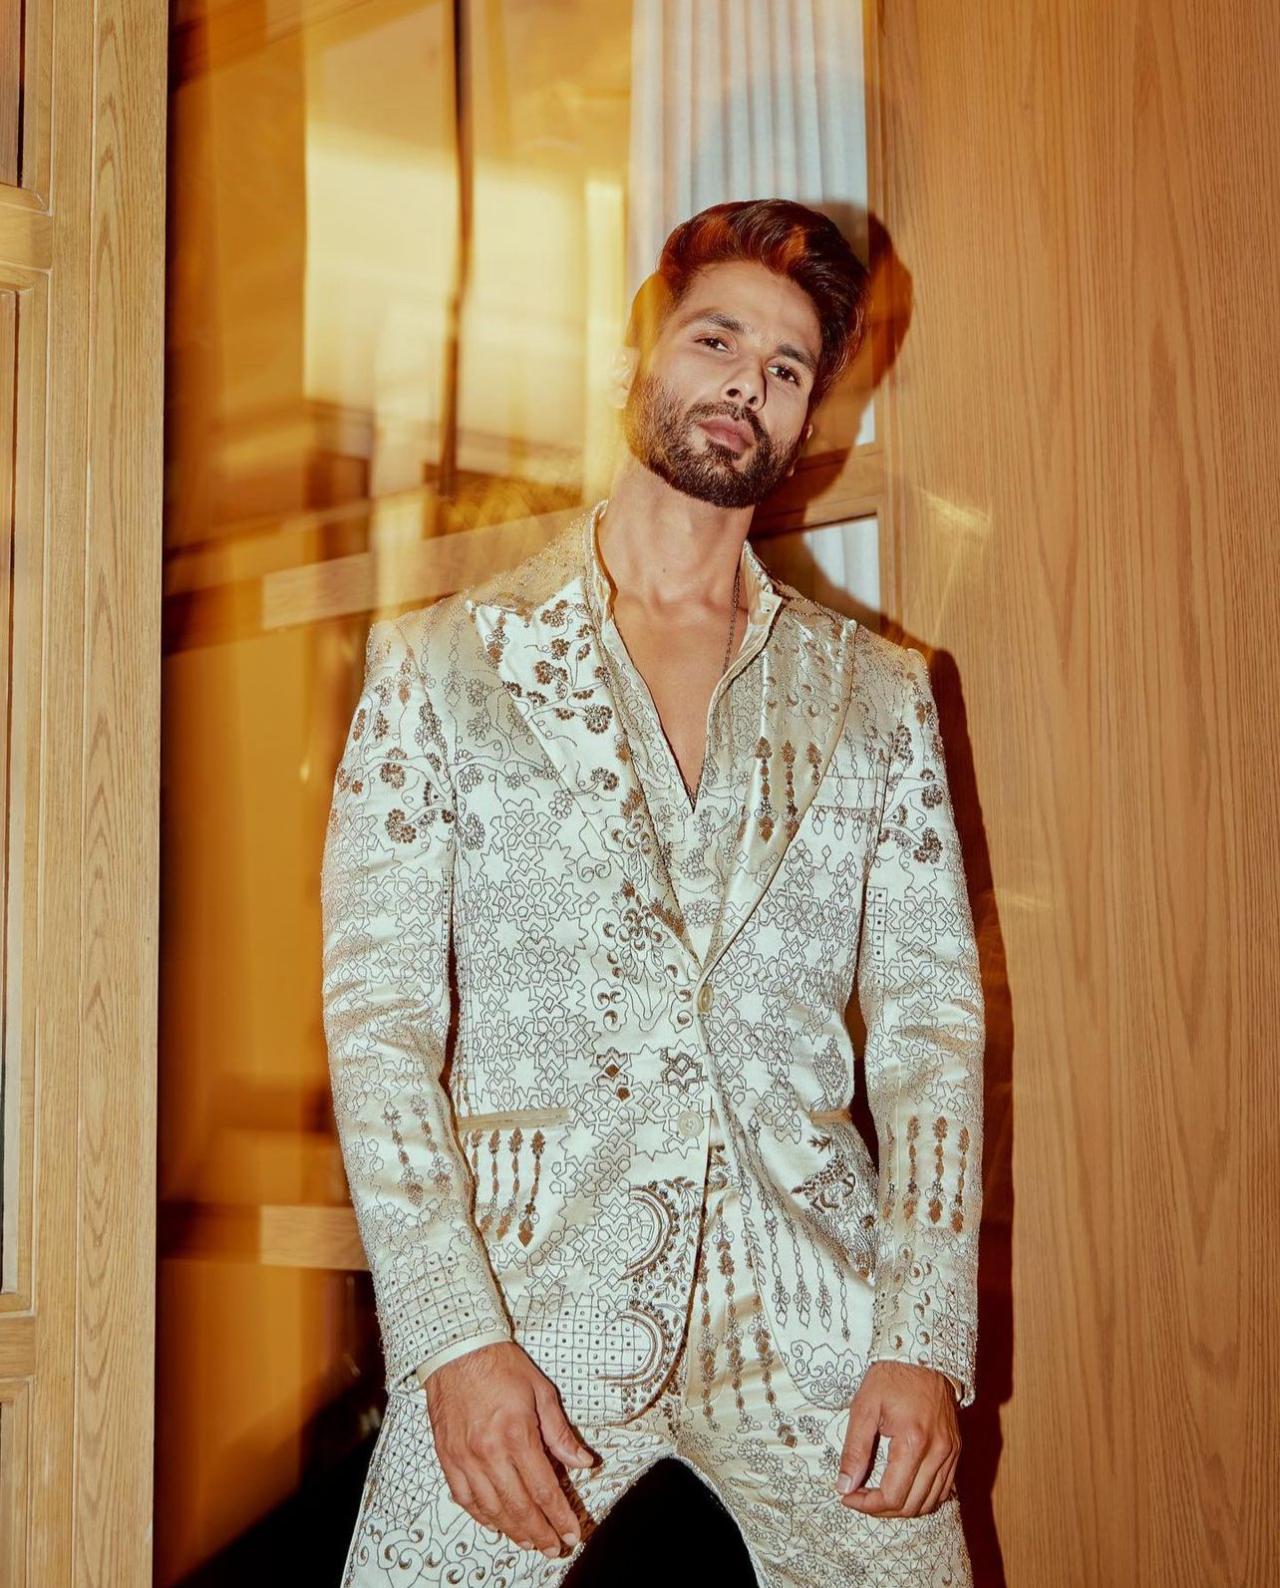 Shahid Kapoor has not only mesmerised us with his versatile acting skills but has also captivated our attention with his bold and fashion-forward sense of style. From his early days as a chocolate boy to now carving his own niche, Shahid always dresses according to his own whims. His recent appearance at NMACC in a custom silver suit with contemporary detailing showcased his ability to make bold fashion choices.